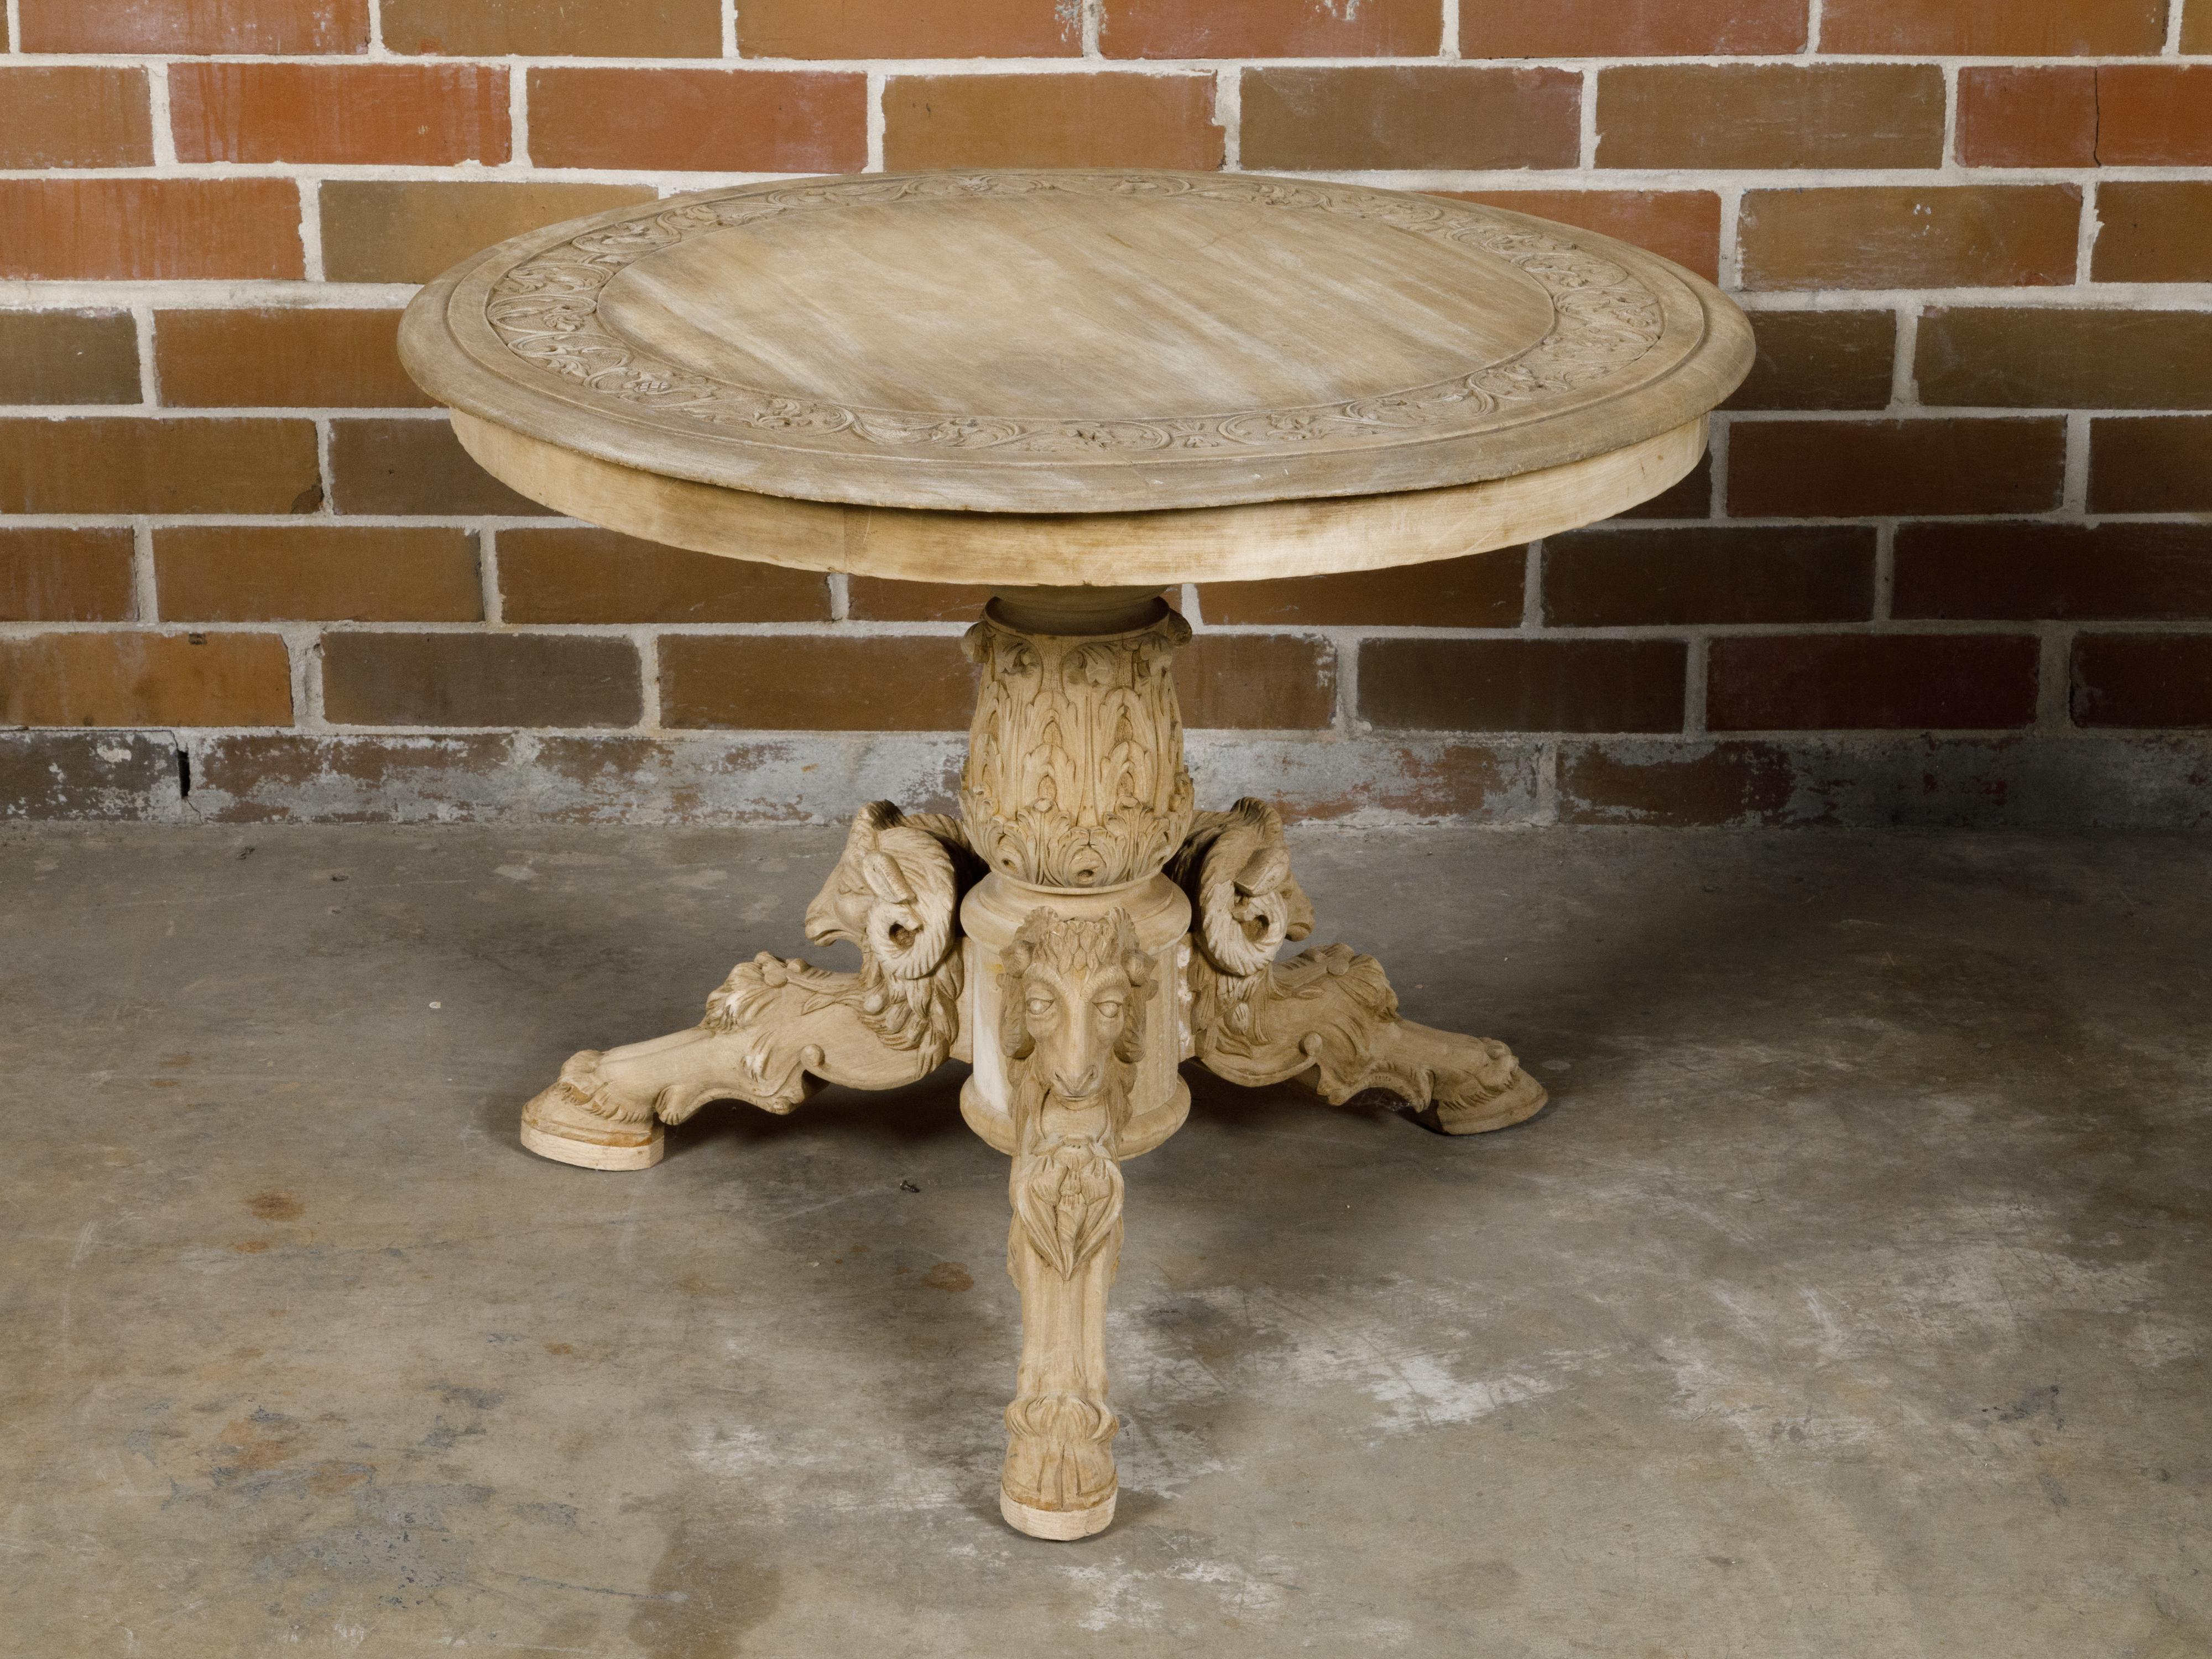 A French bleached wood pedestal table from circa 1900 with circular top and carved rams heads. Discover the timeless elegance of this French bleached wood pedestal table, circa 1900, a superb addition to any refined home decor. This exquisite table